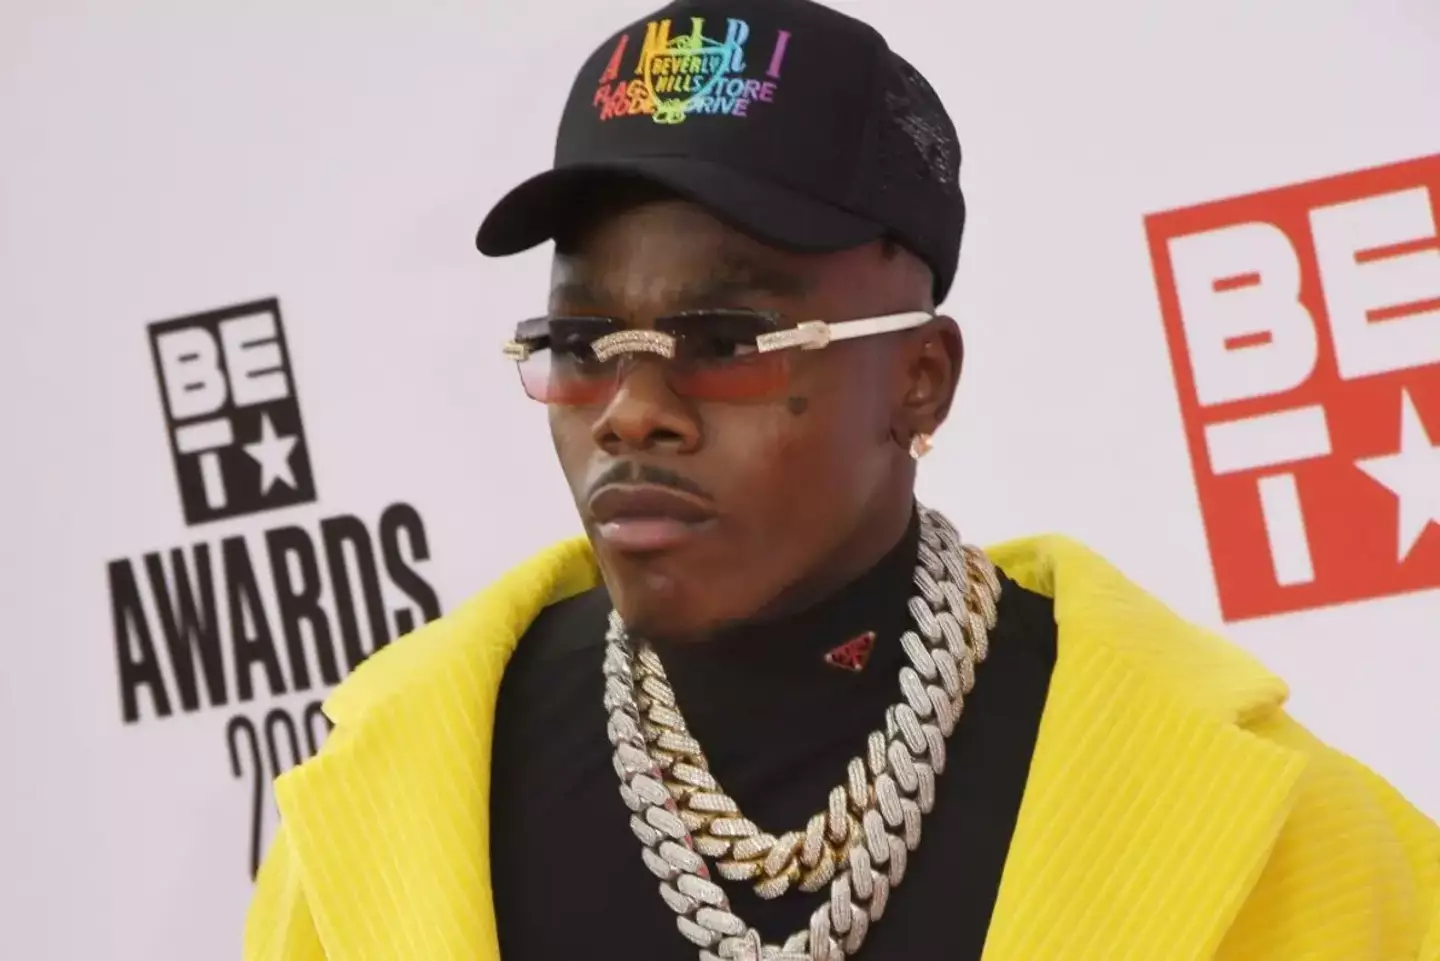 It is believed DaBaby confronted the intruder and shot him in the leg.